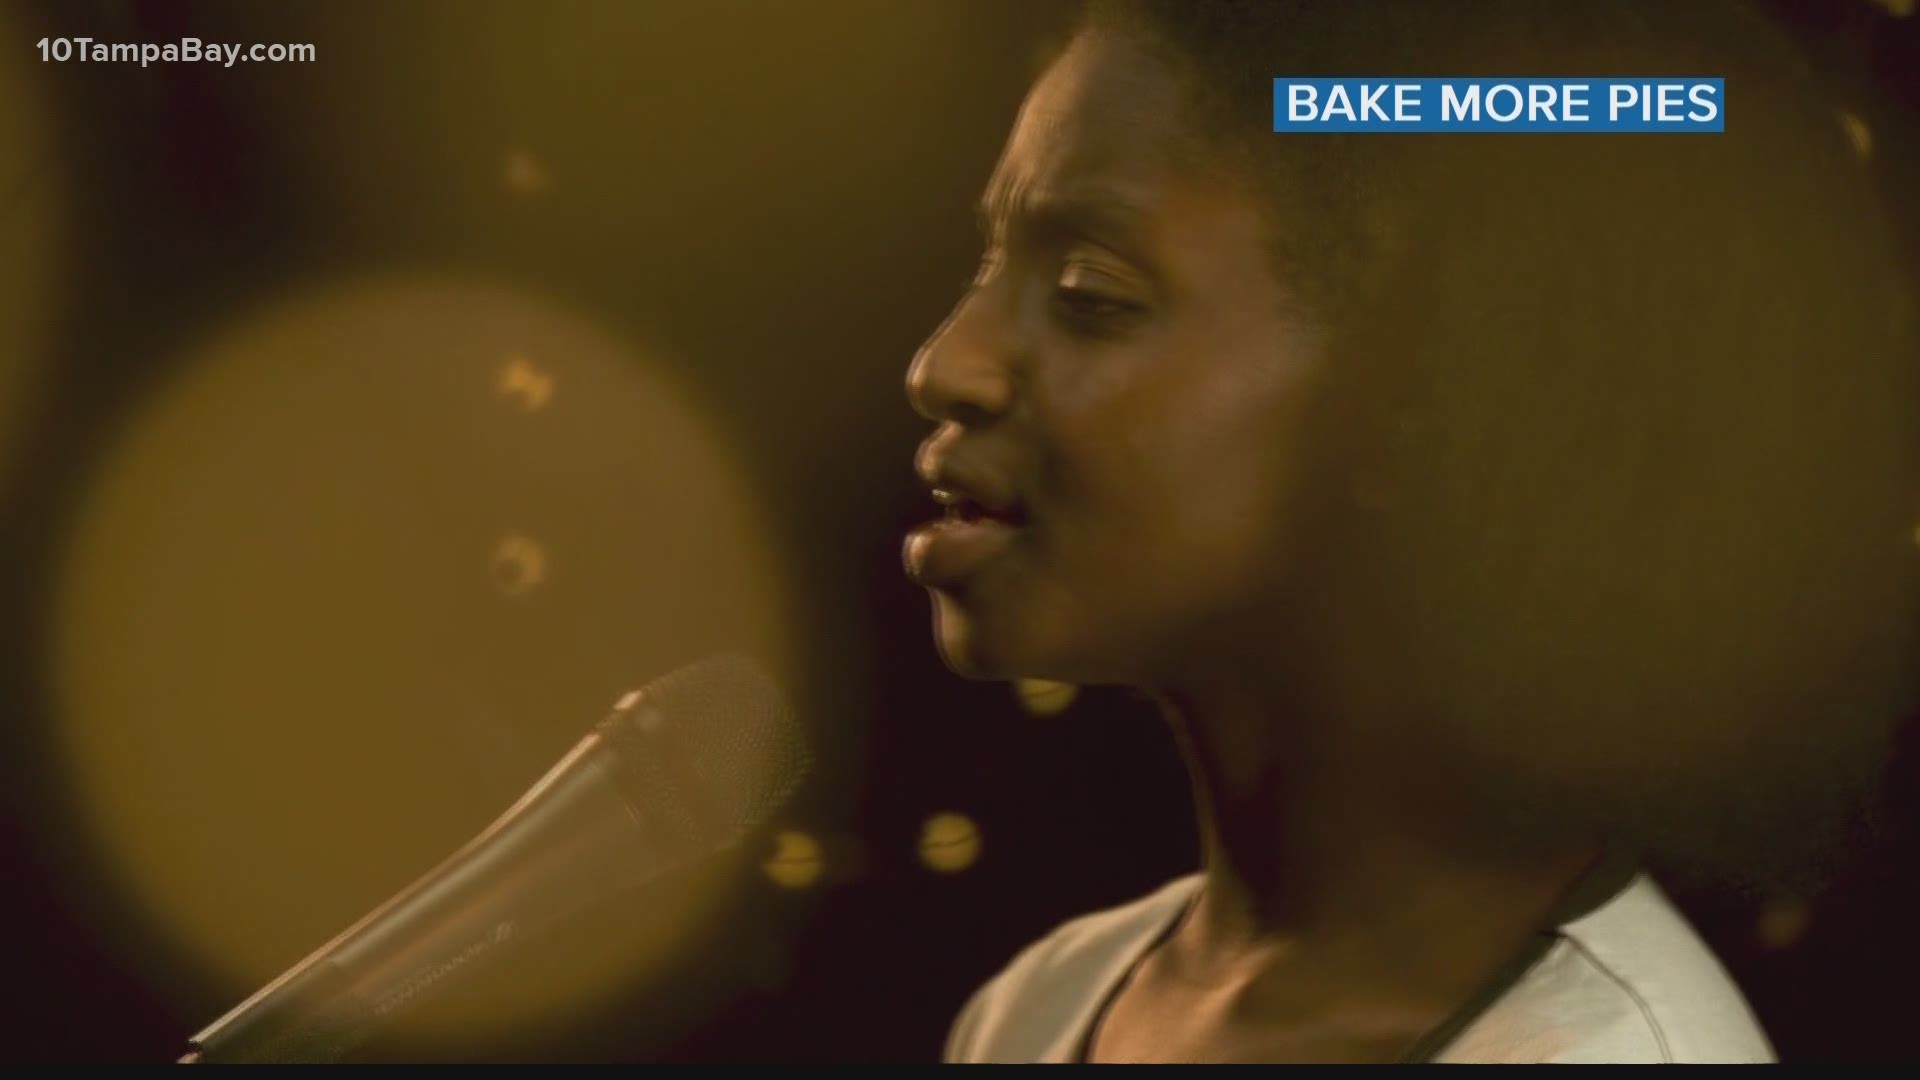 Bake More Pies offered to record Janicia Jordan singing in hopes of helping the teen's talent get recognized.